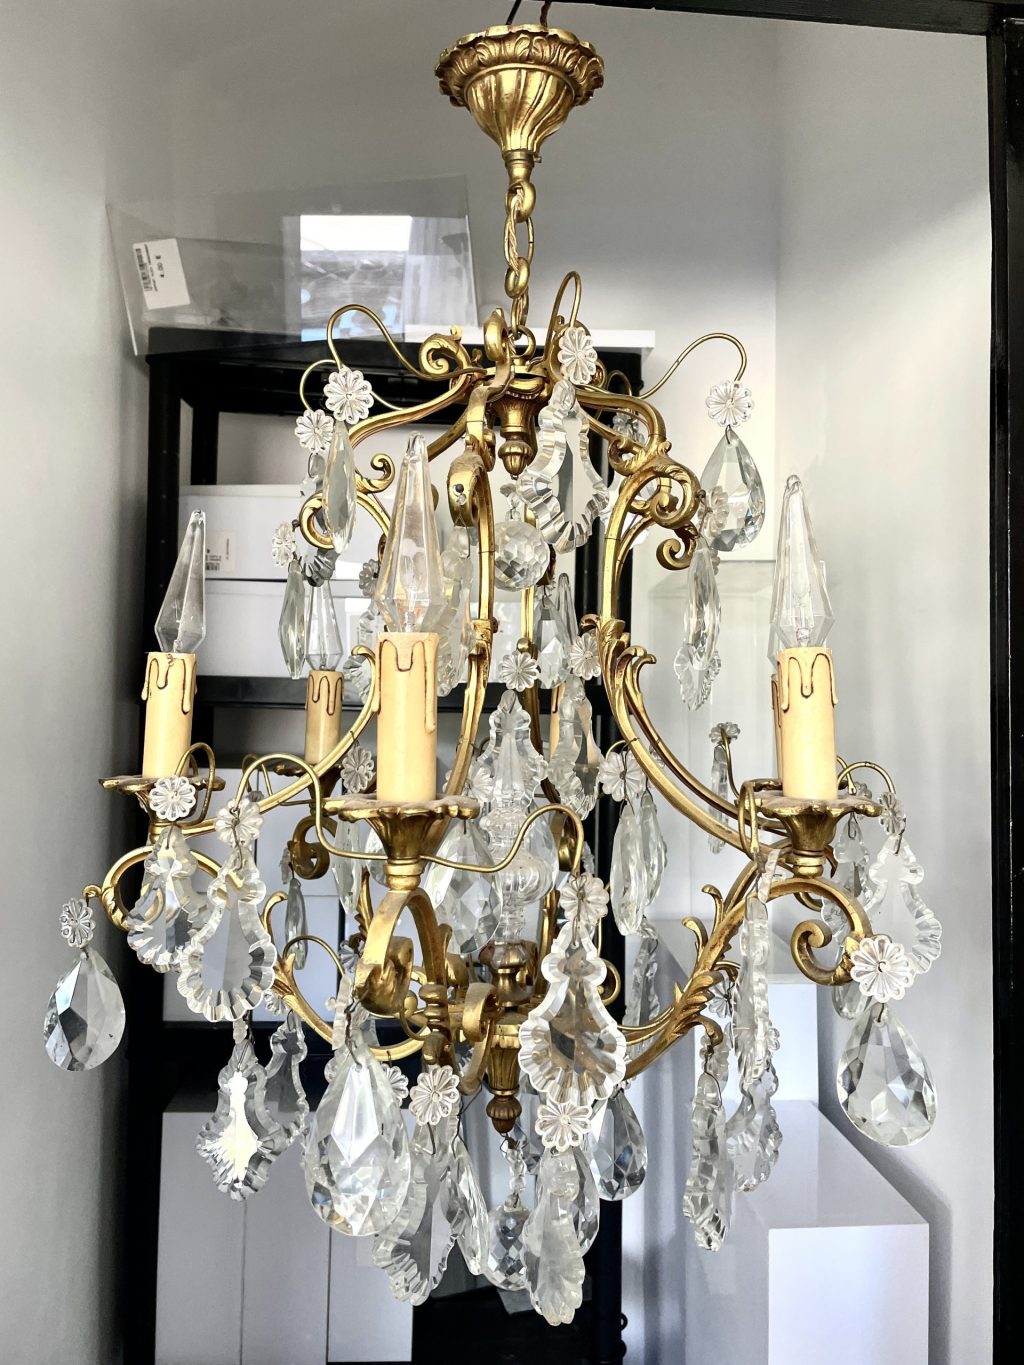 Vintage French Large Light Metal Glass Chandelier Sconce Brass Metal Electric Lamp Six Bulb Electric Pendant c1940-1950’s